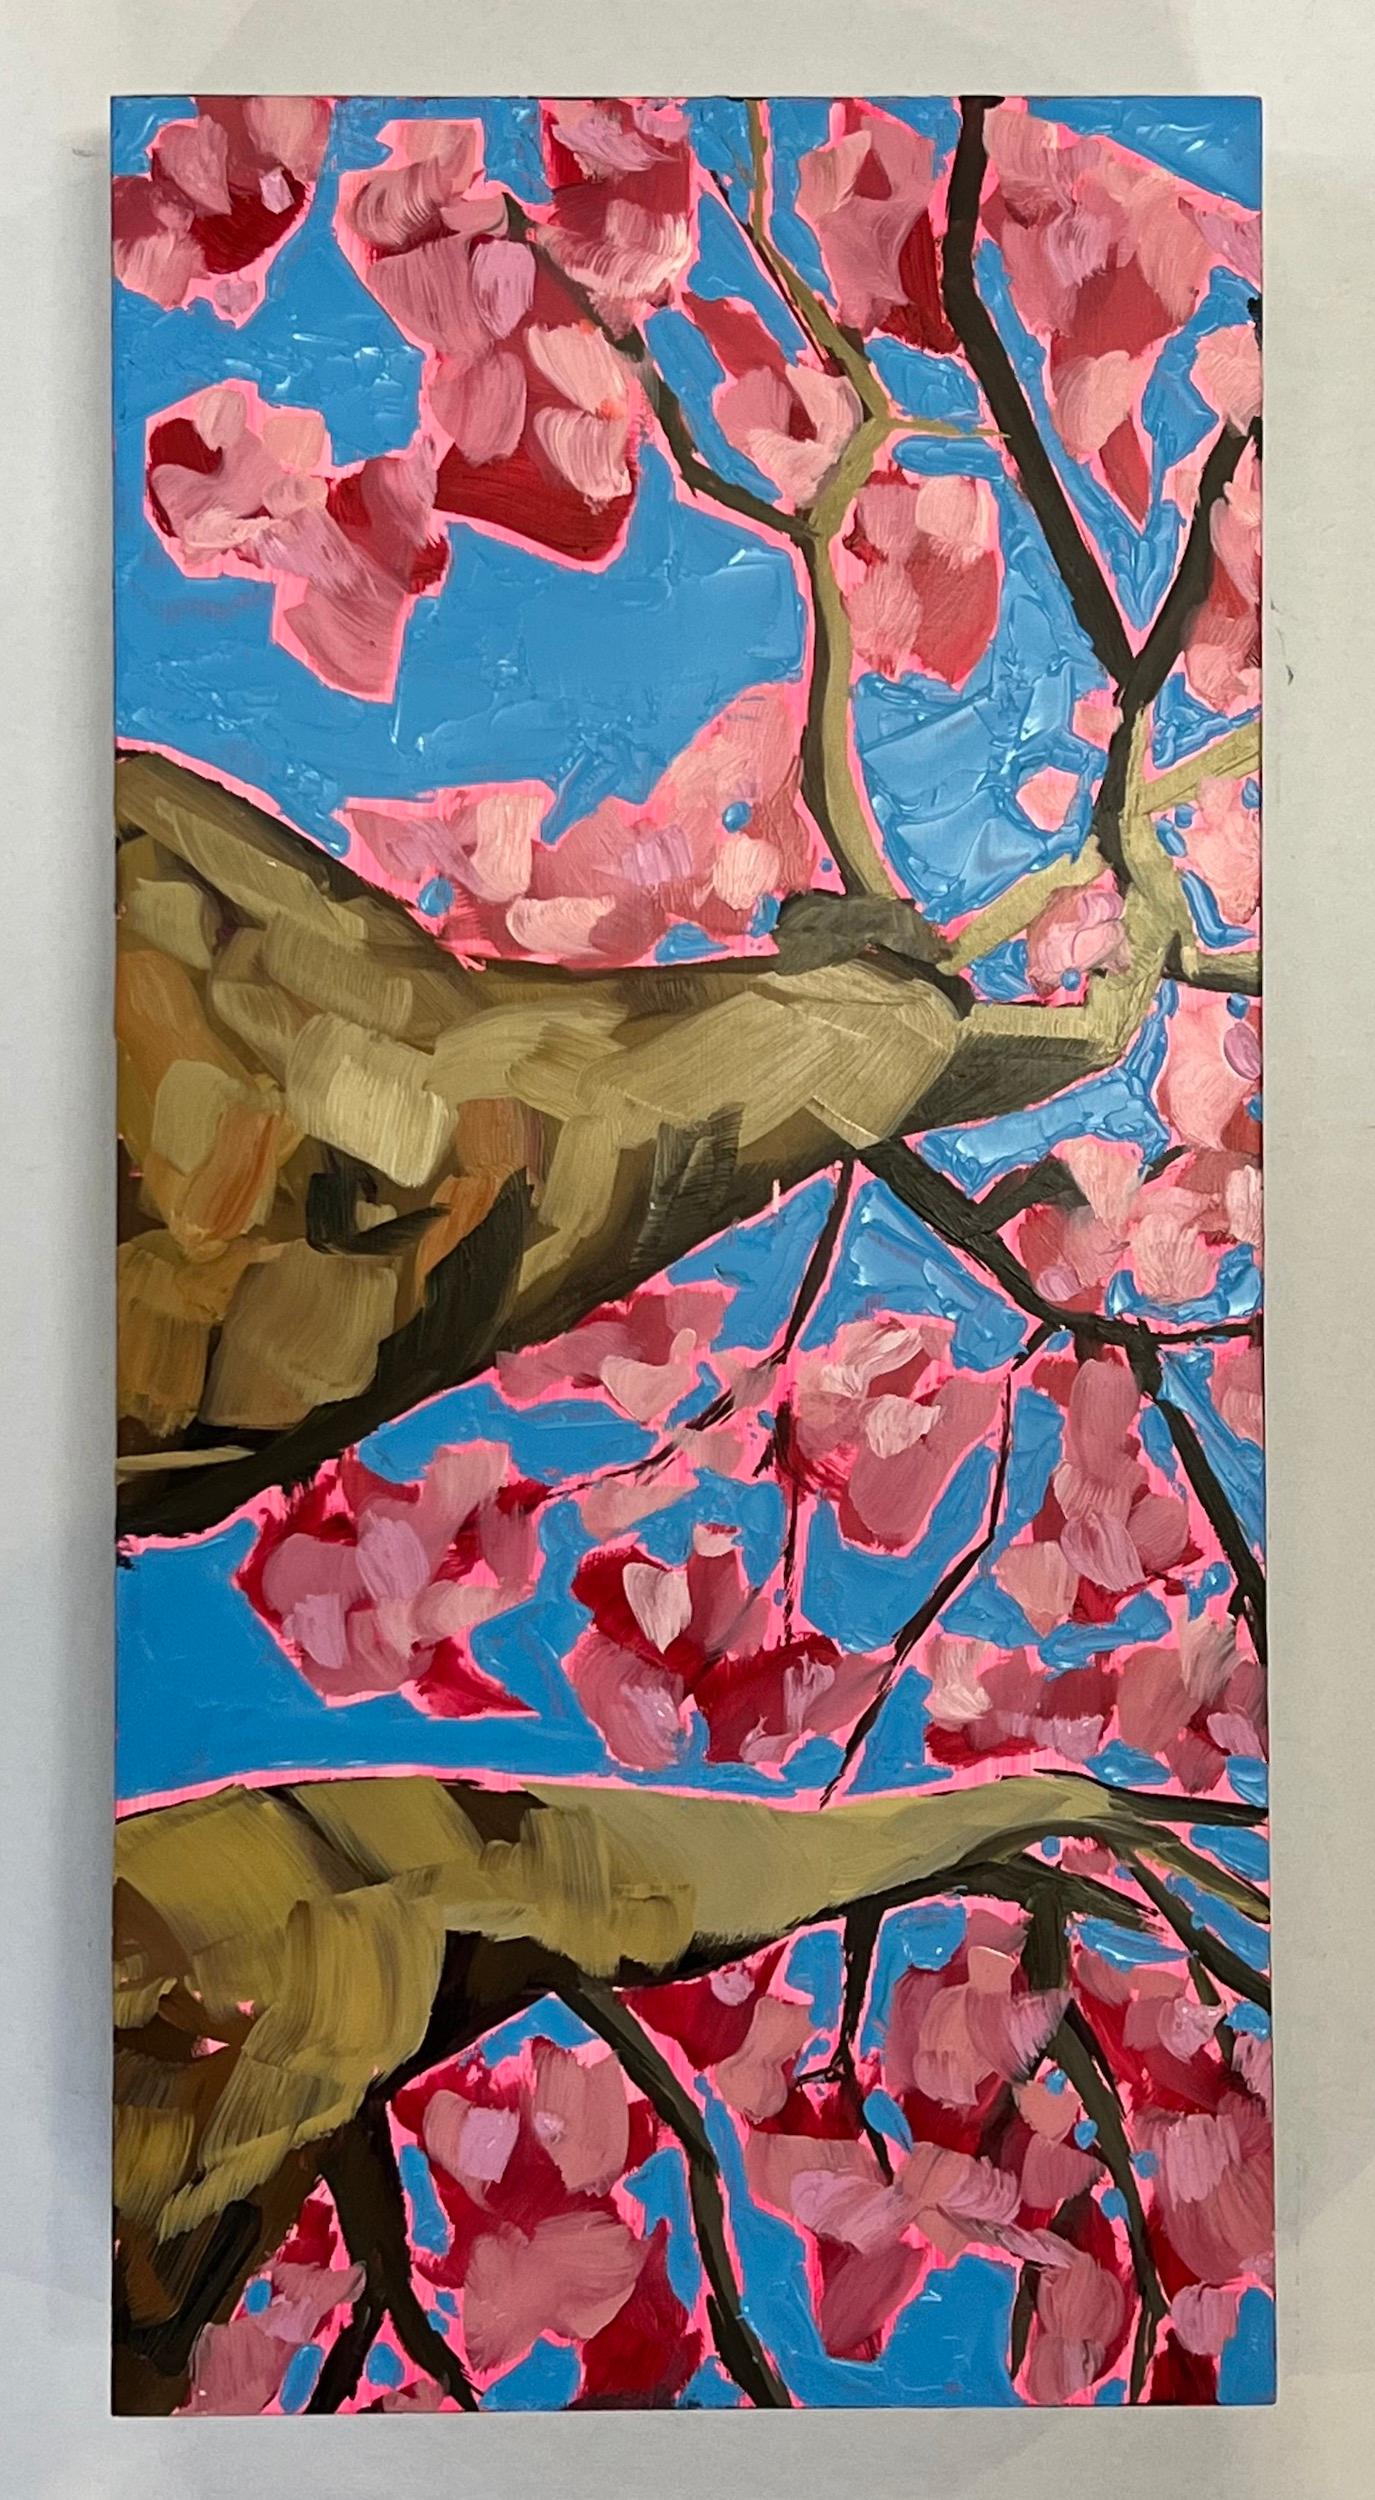 Looking Up Through Pink Blossom to Feel Hope - Painting by Emily Finch